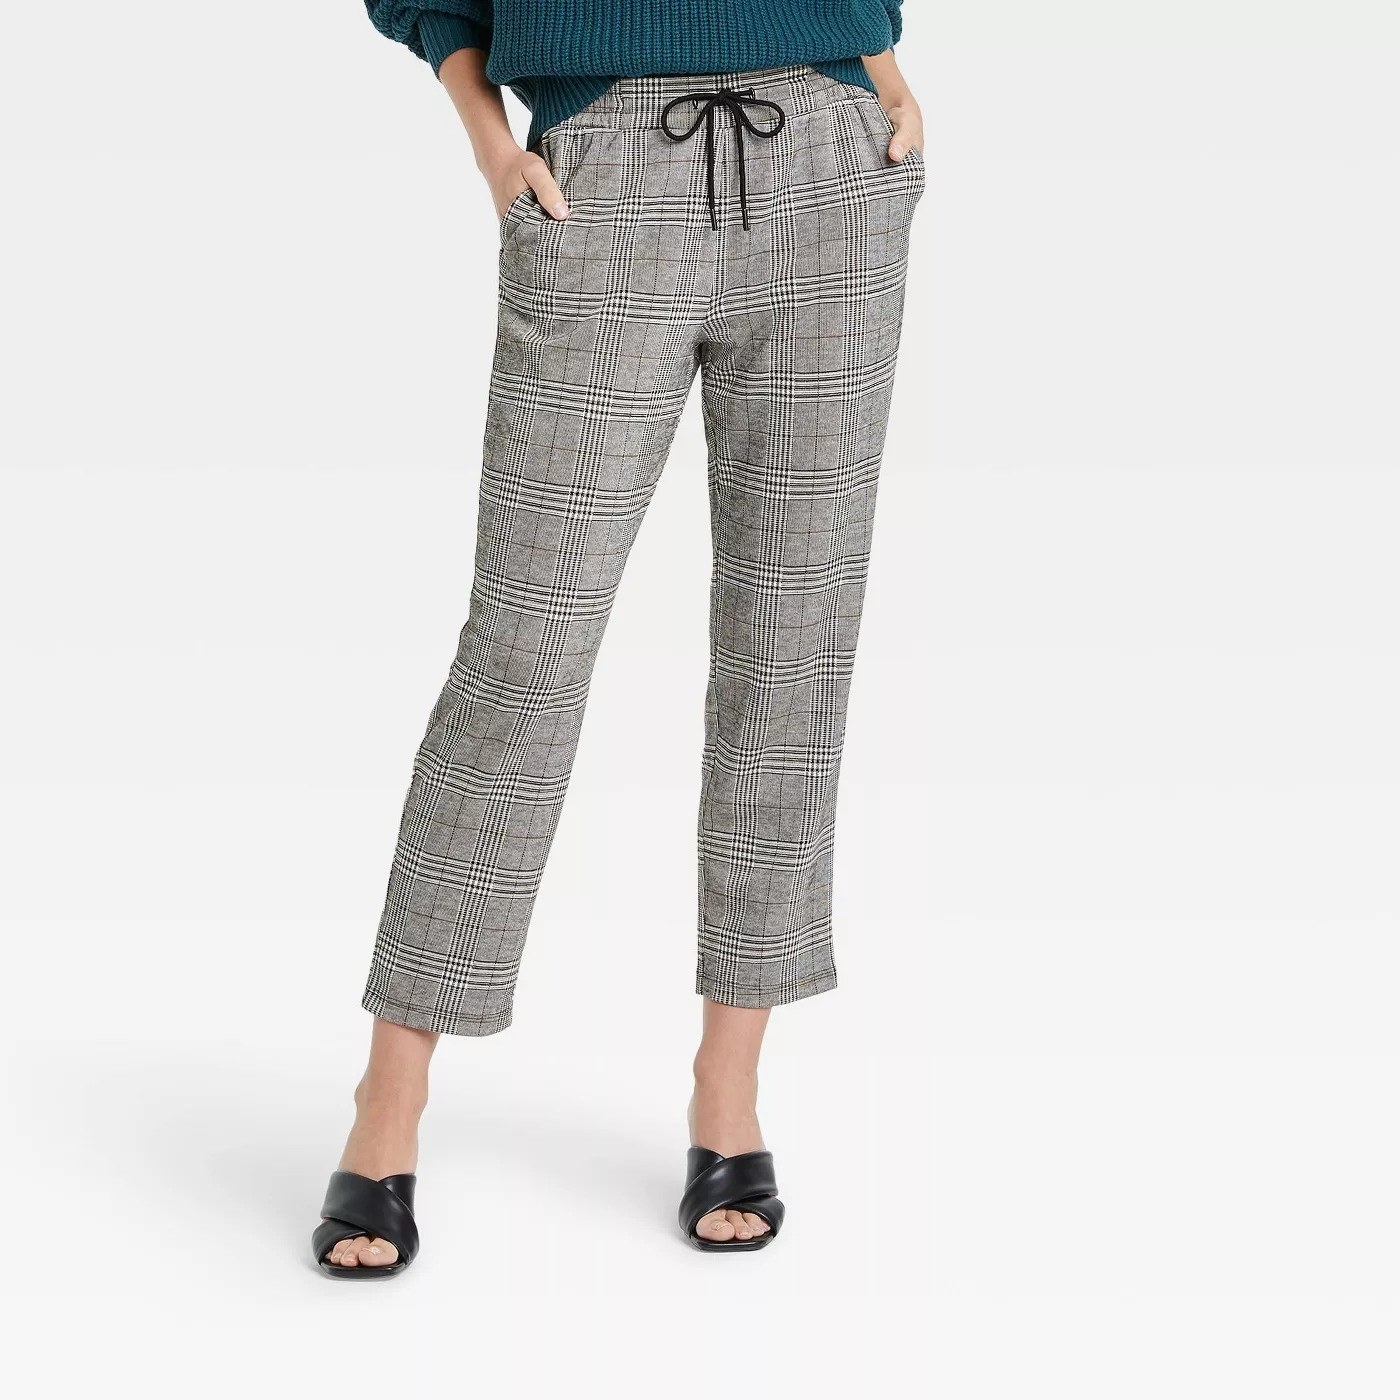 Model wearing gray plaid pants, stops above the ankle